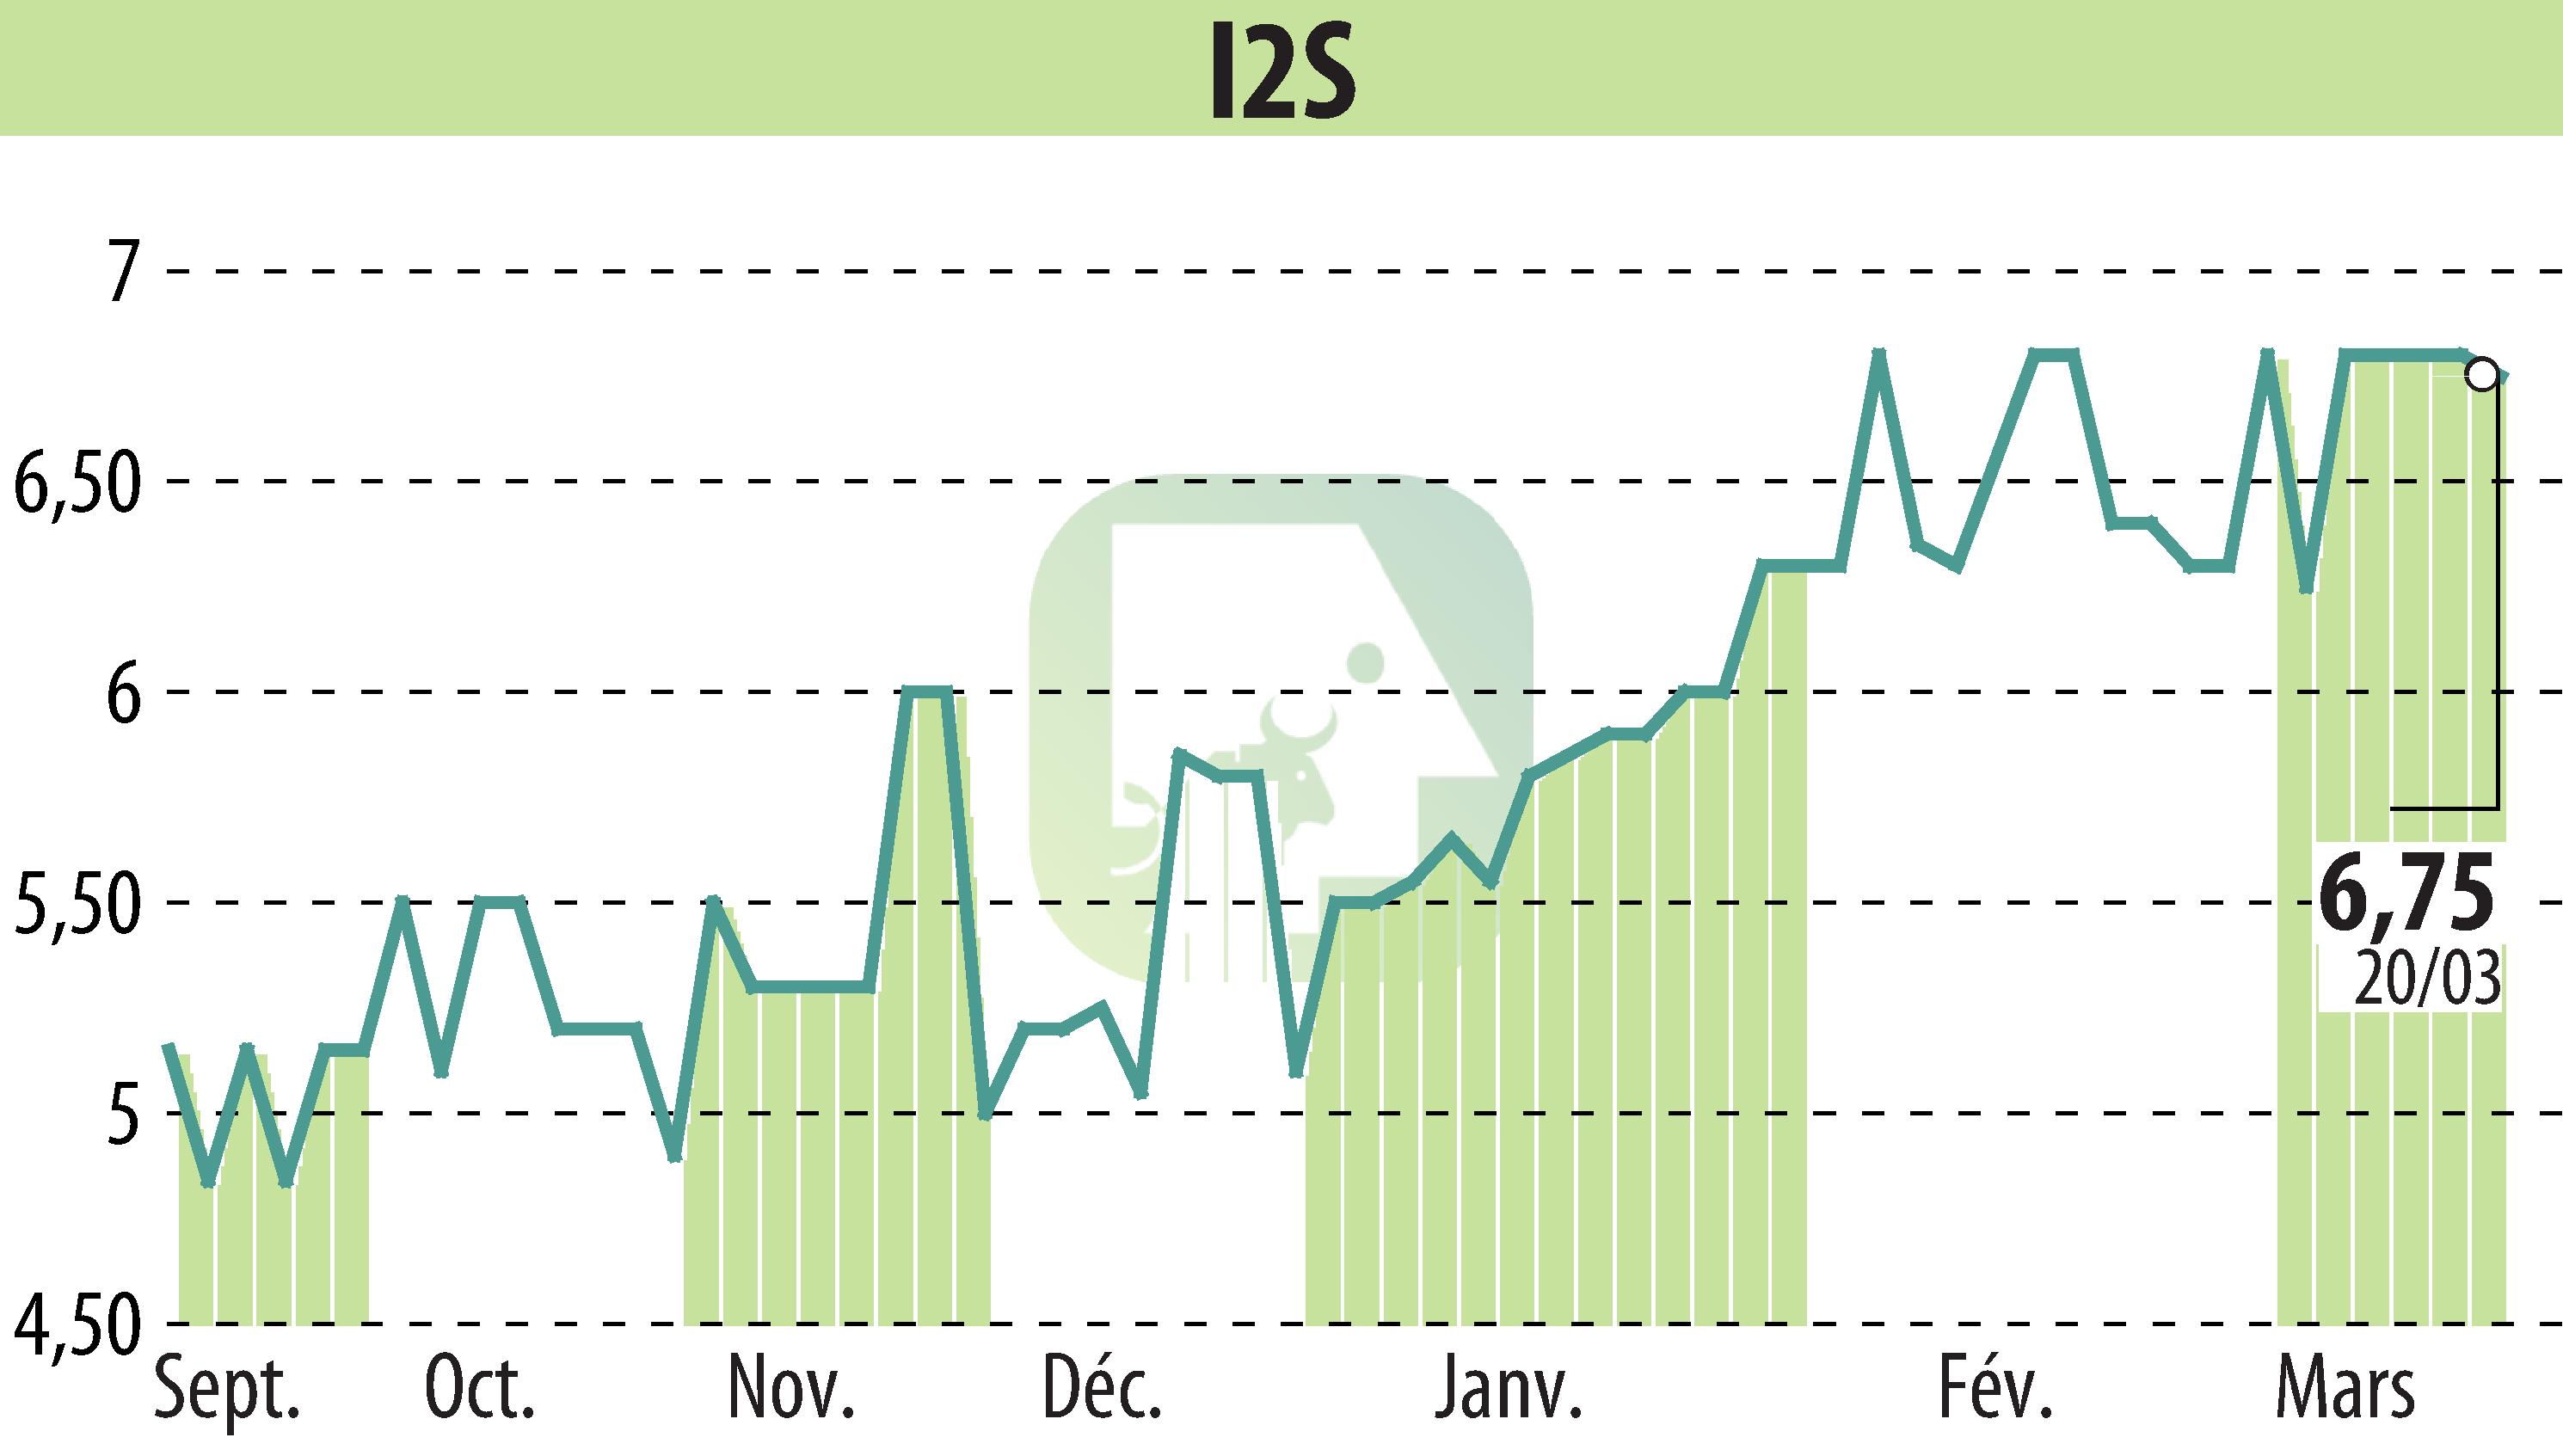 Stock price chart of I2S (EPA:ALI2S) showing fluctuations.